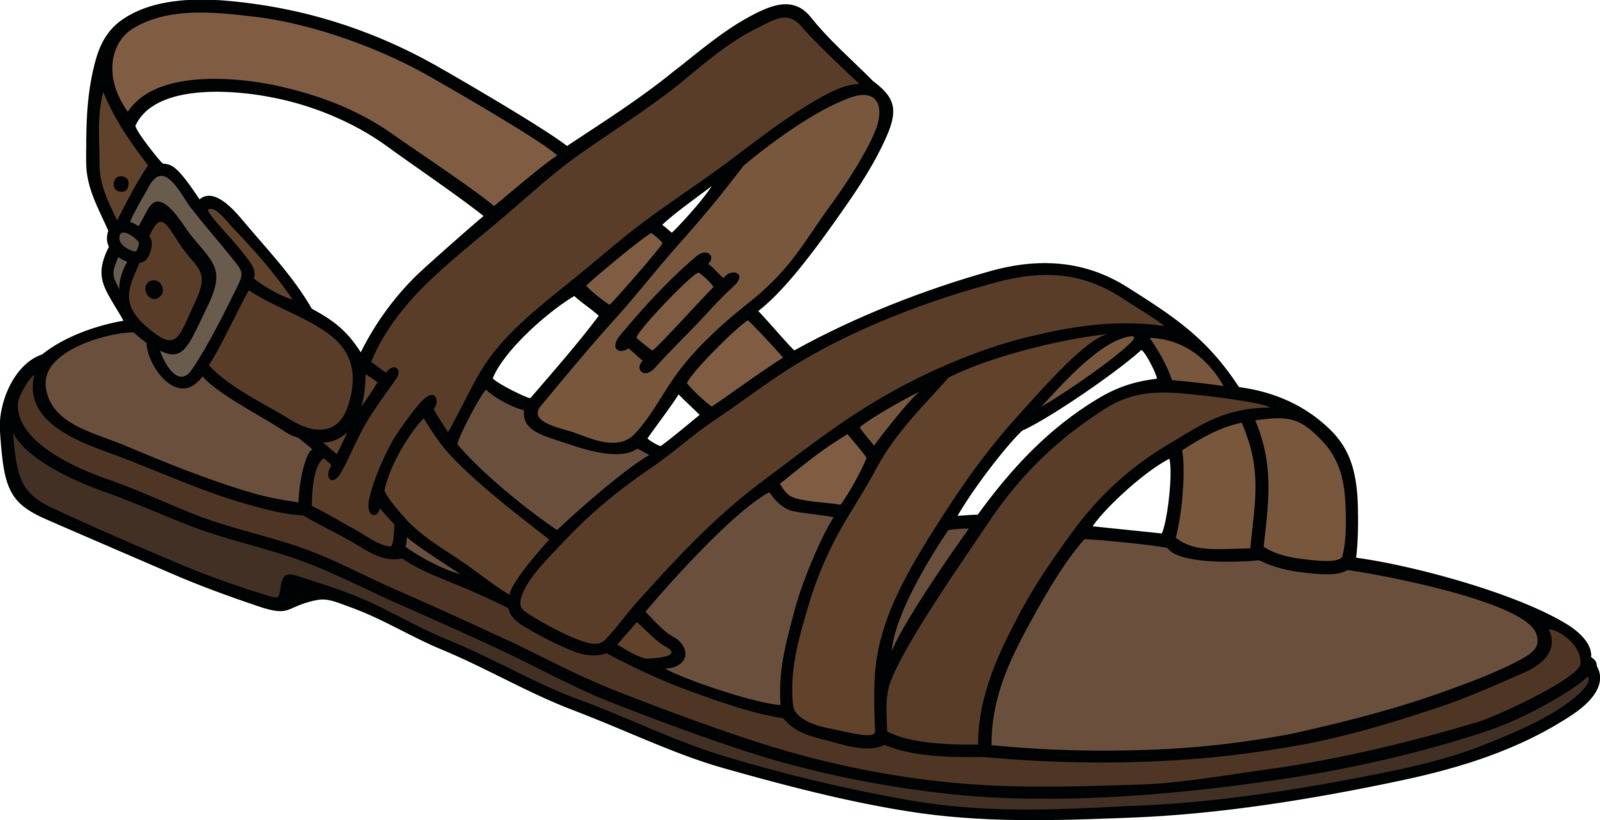 Hand drawing of a leather low woman's sandal